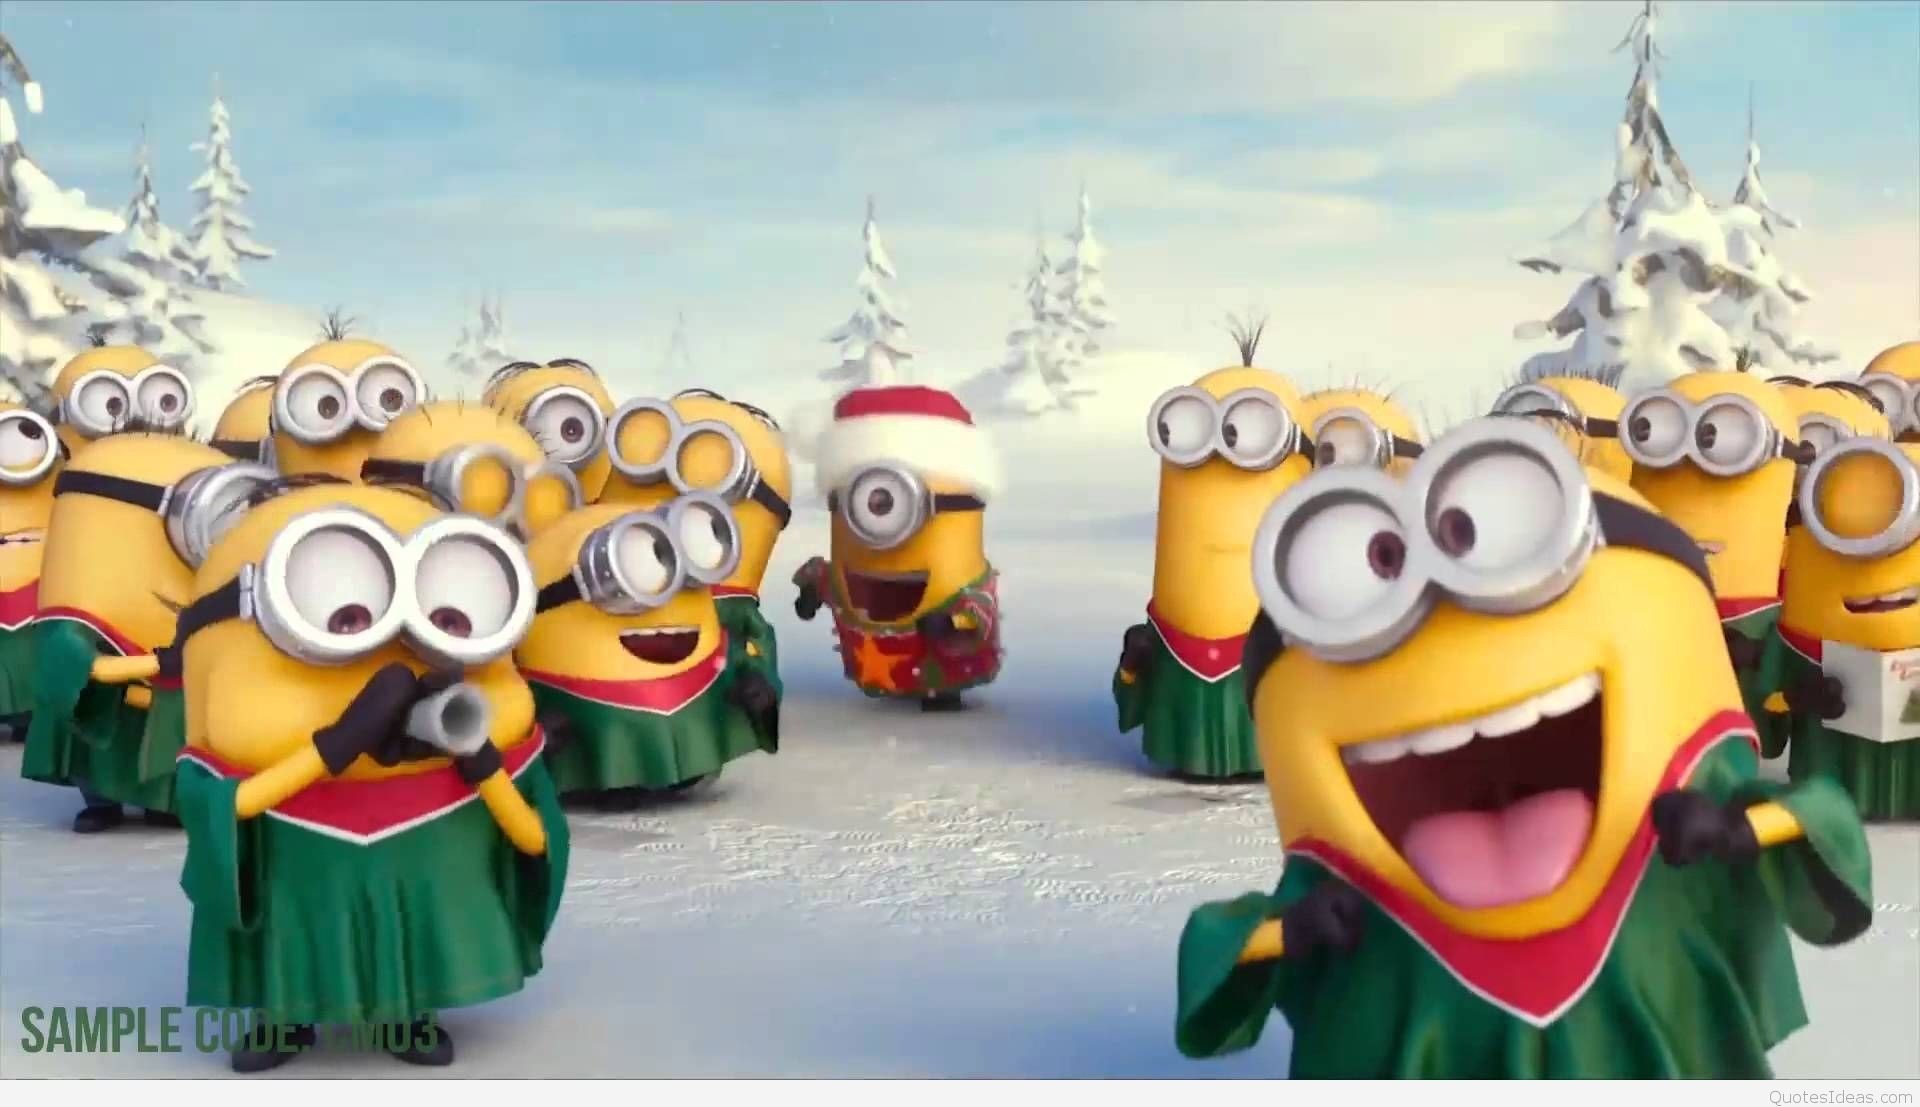 1920x1107 Funny Christmas Minions Wallpapers Images Hd 2015 2016 Intended